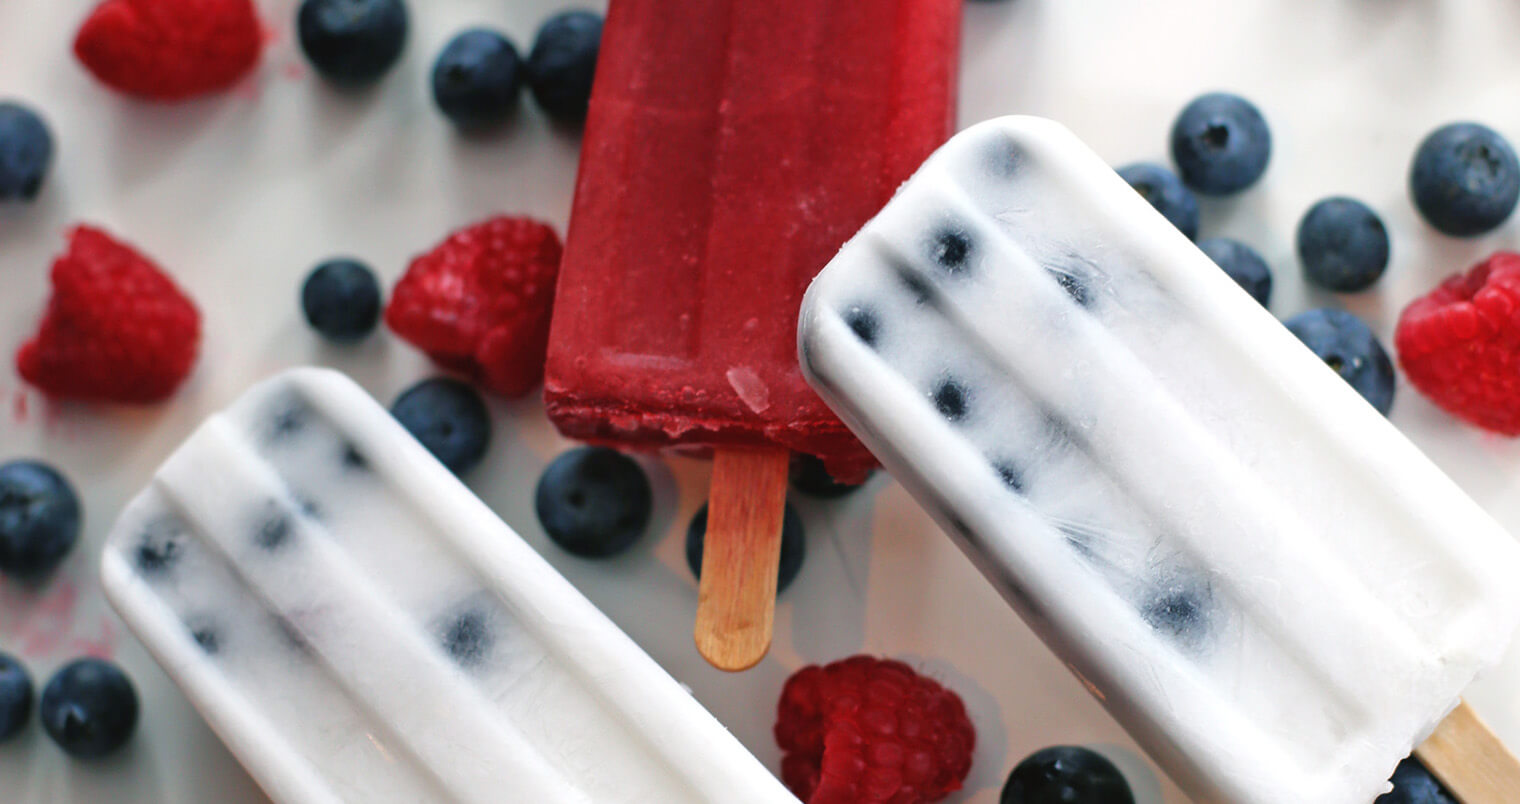 Ginsicles for Independence Day